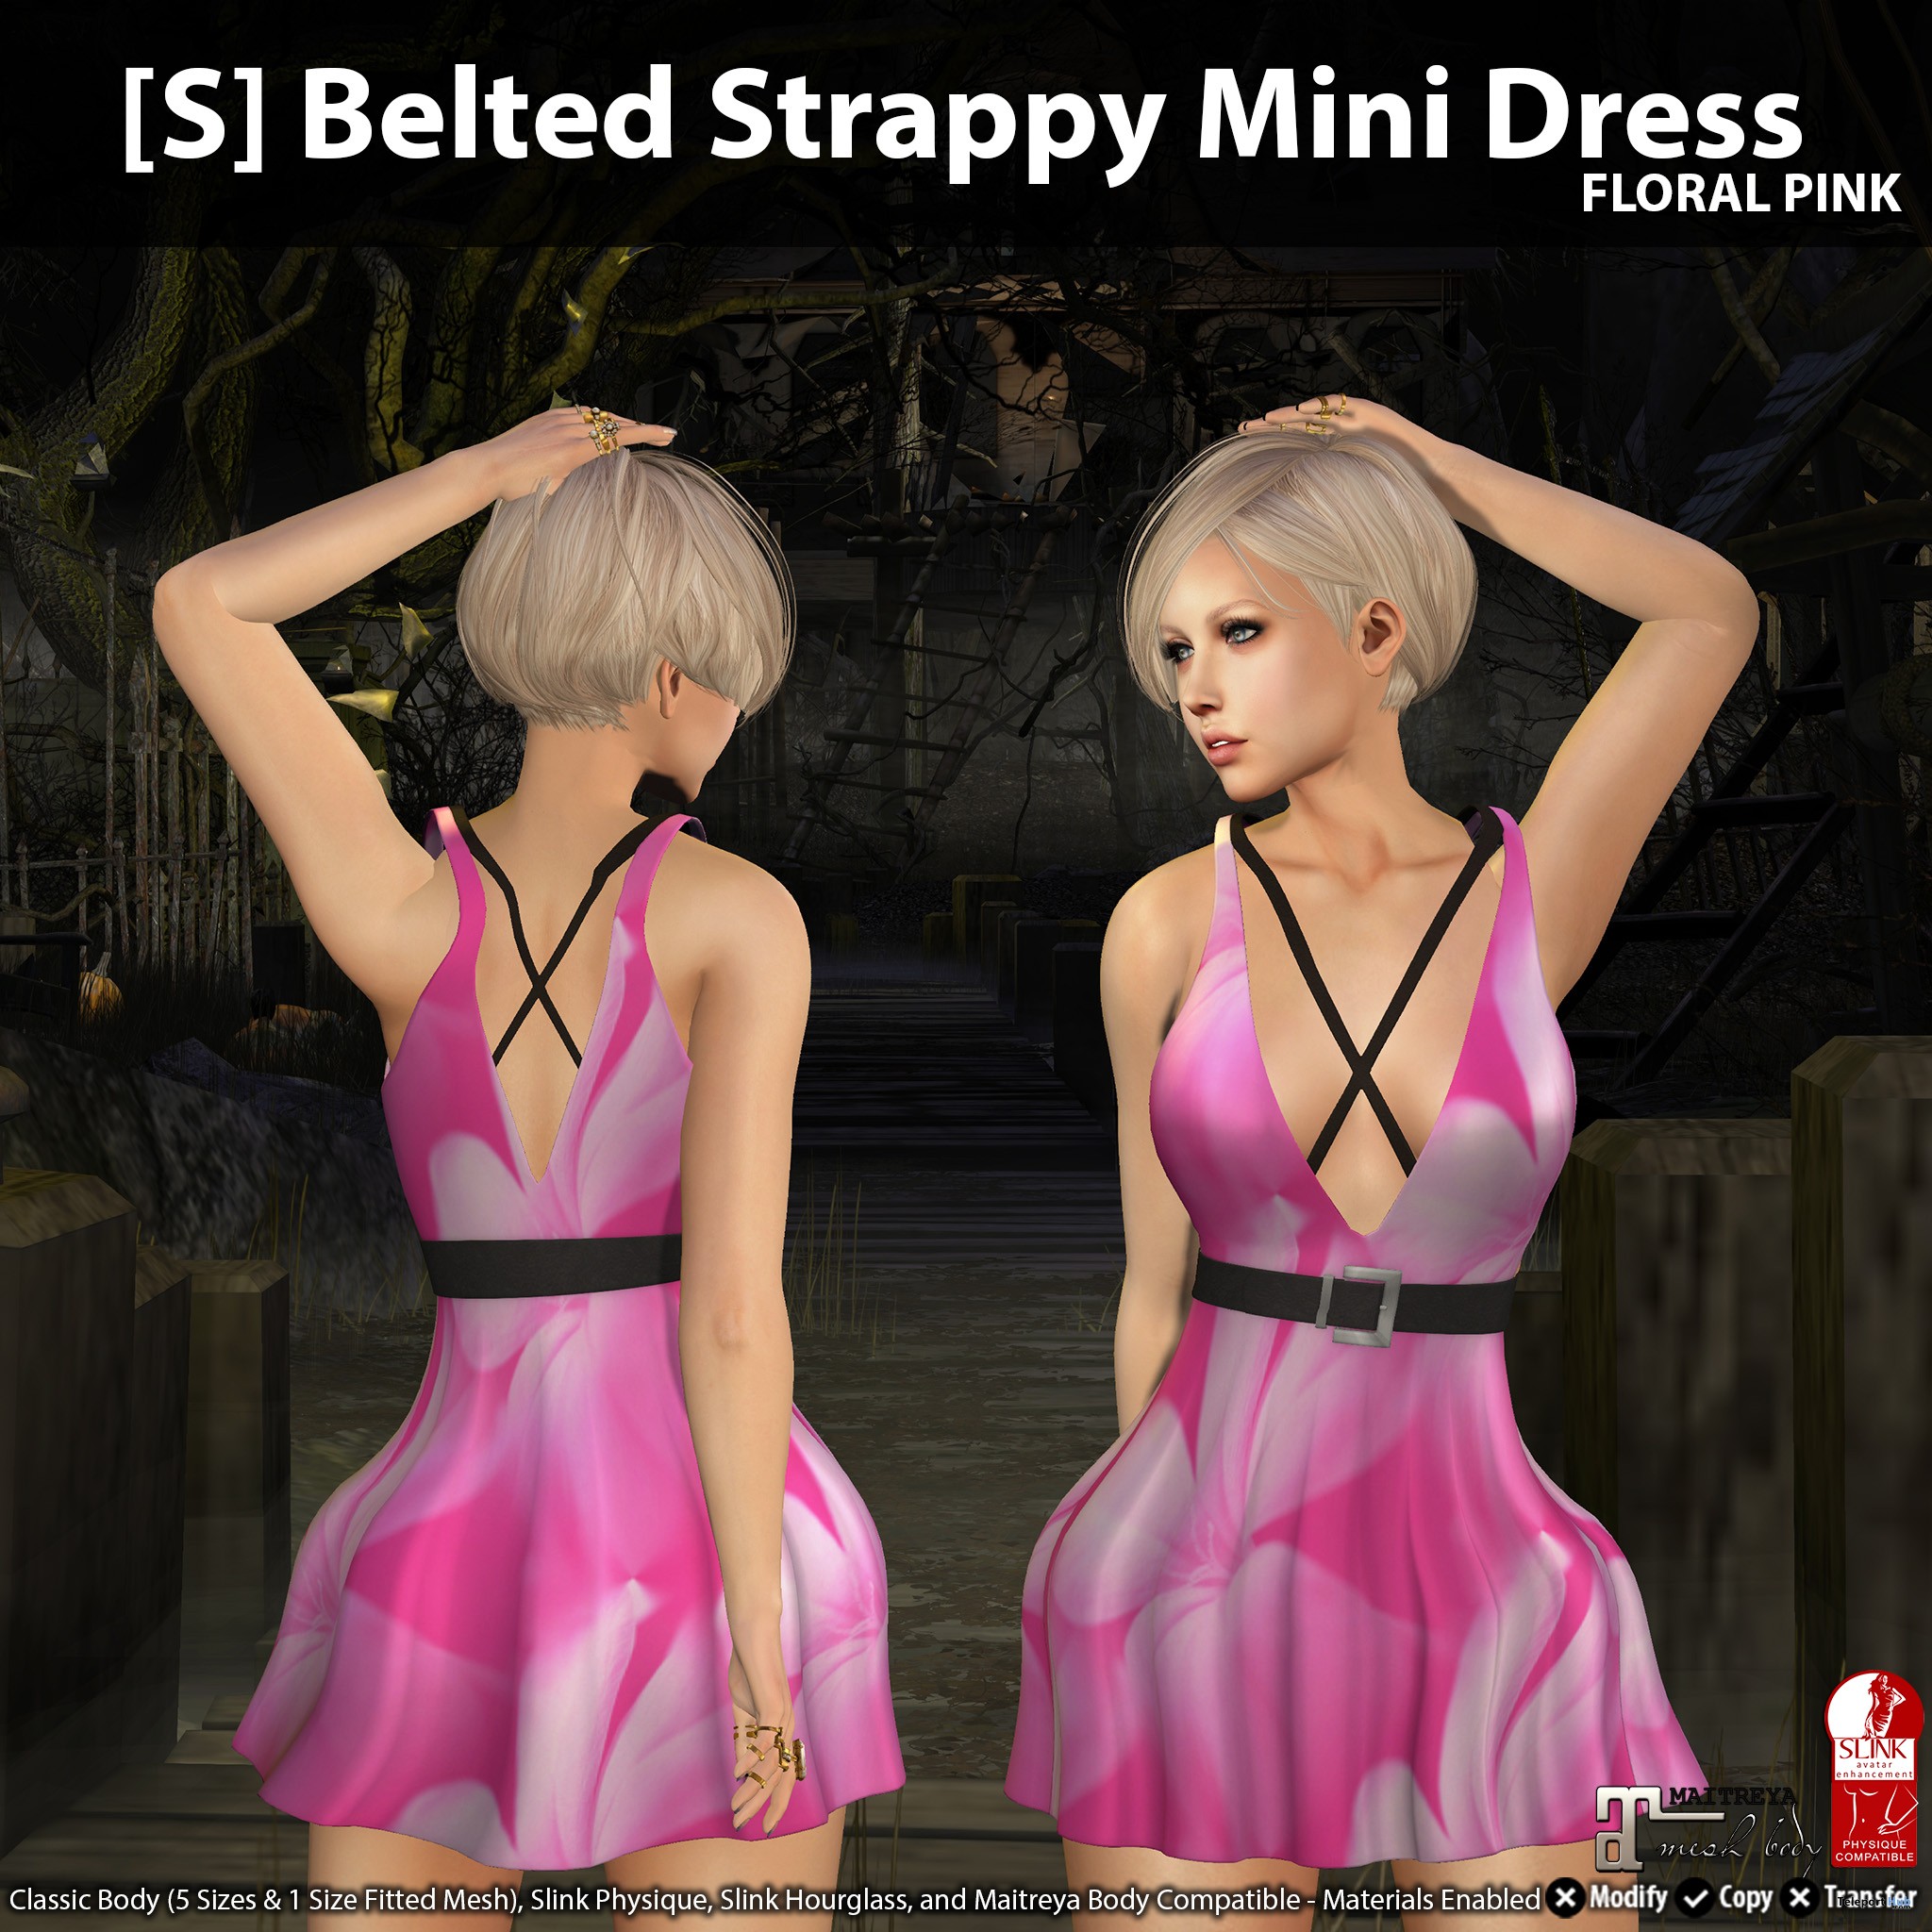 New Release: [S] Belted Strappy Mini Dress by [satus Inc] - Teleport Hub - teleporthub.com